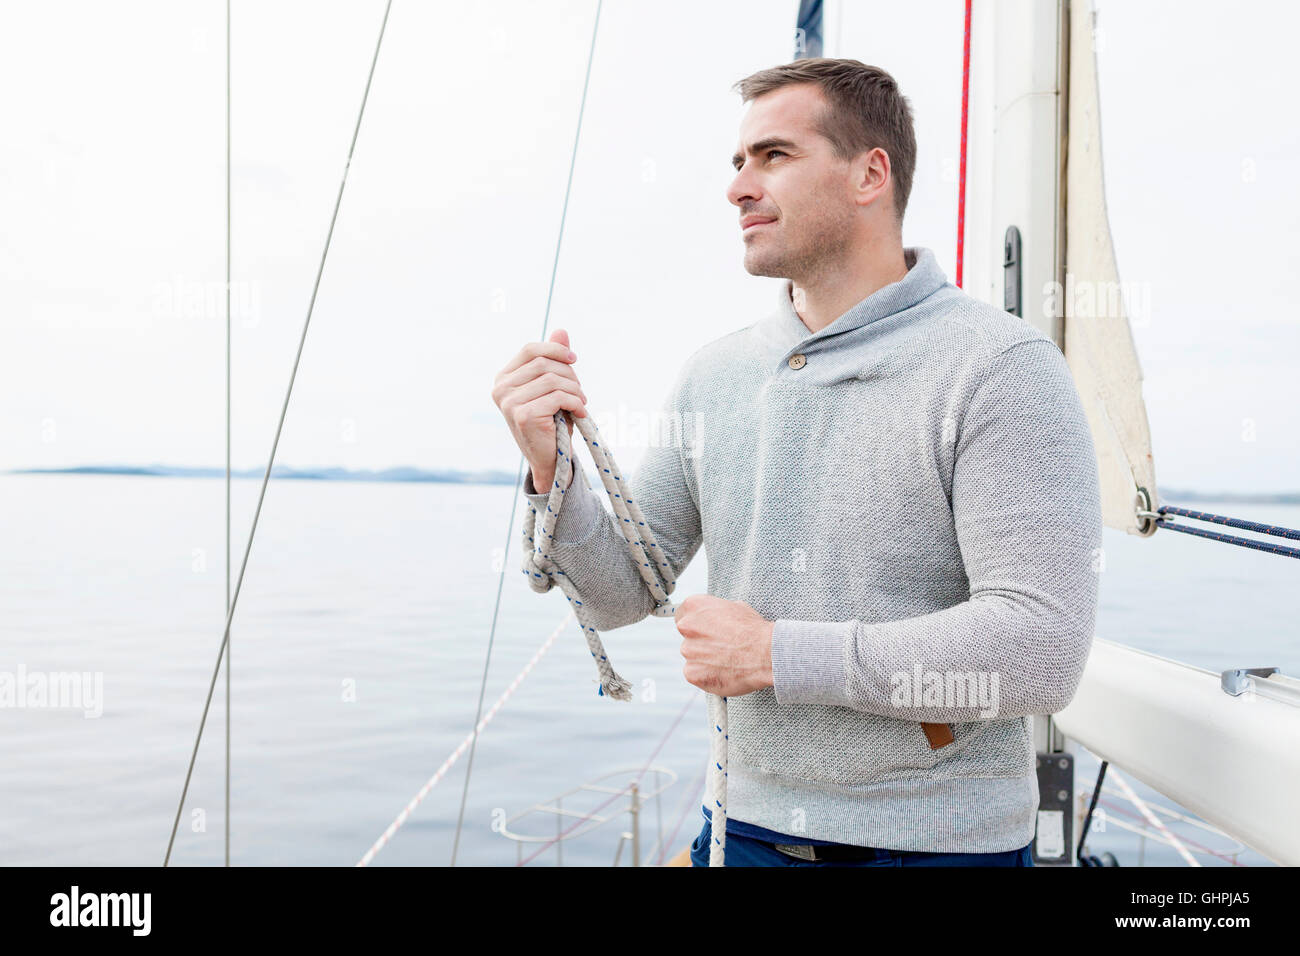 Man on yacht curling up rope Stock Photo